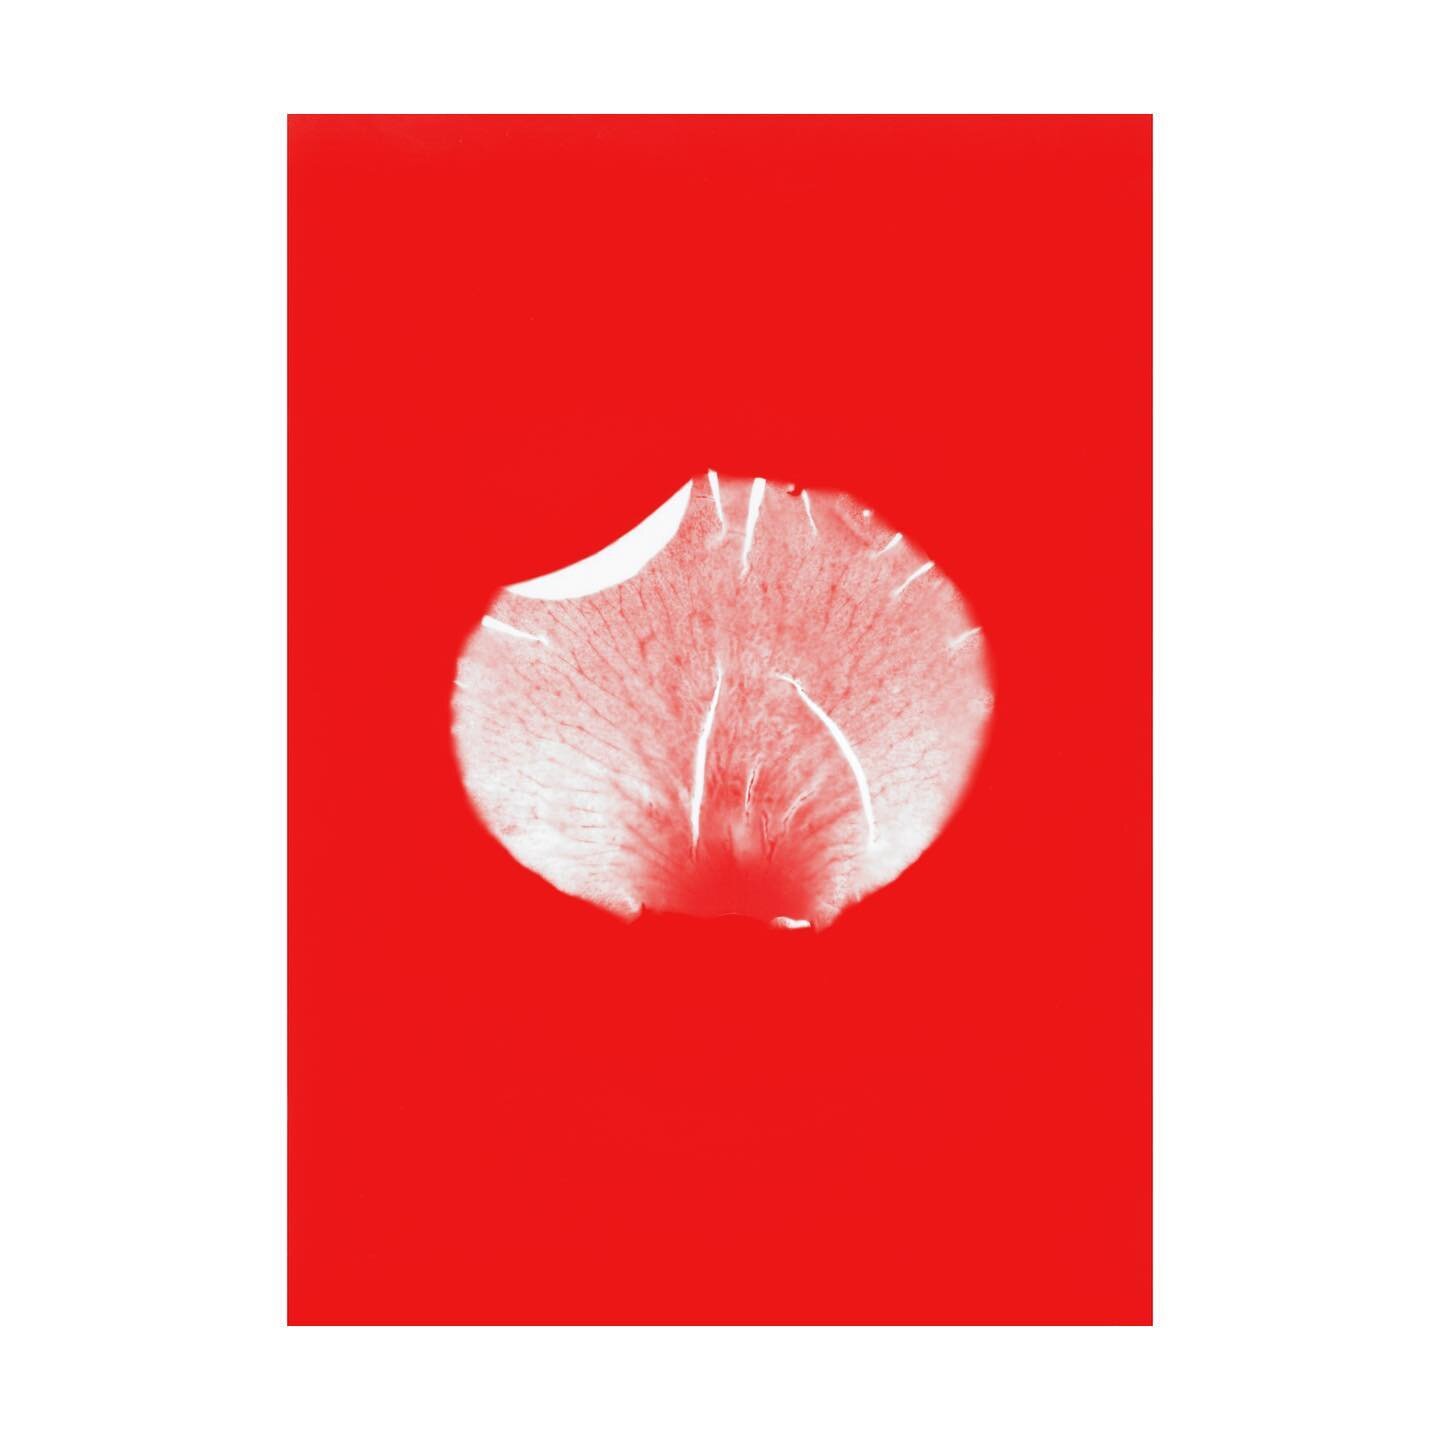 &ldquo;Petal Pusher&rdquo; (5&rdquo; x 7&rdquo;), from a series of forty-something digitally-altered photograms of petals pulled from a rose bouquet. 

If you&rsquo;re casually in Europe this fall (haha!), go see this little one in Rome at Loosen Gal